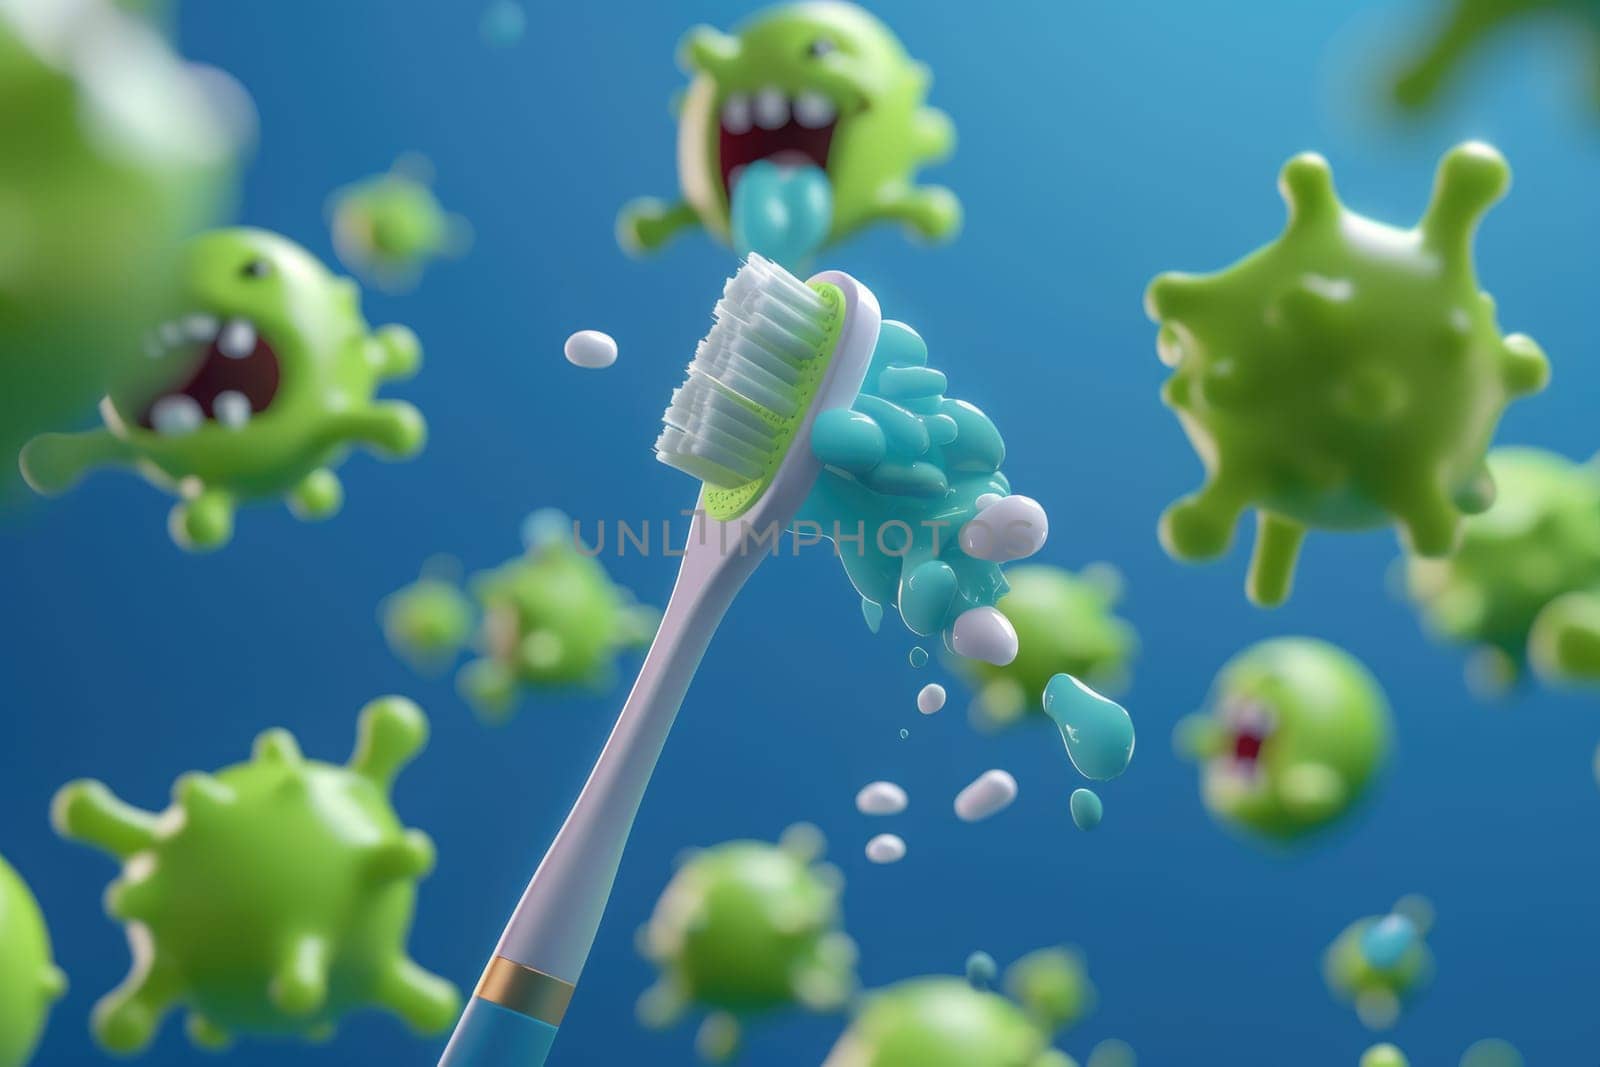 A minimalist 3D scene featuring a charming toothbrush heroically escaping a horde of cartoon. by AI generated image by wichayada